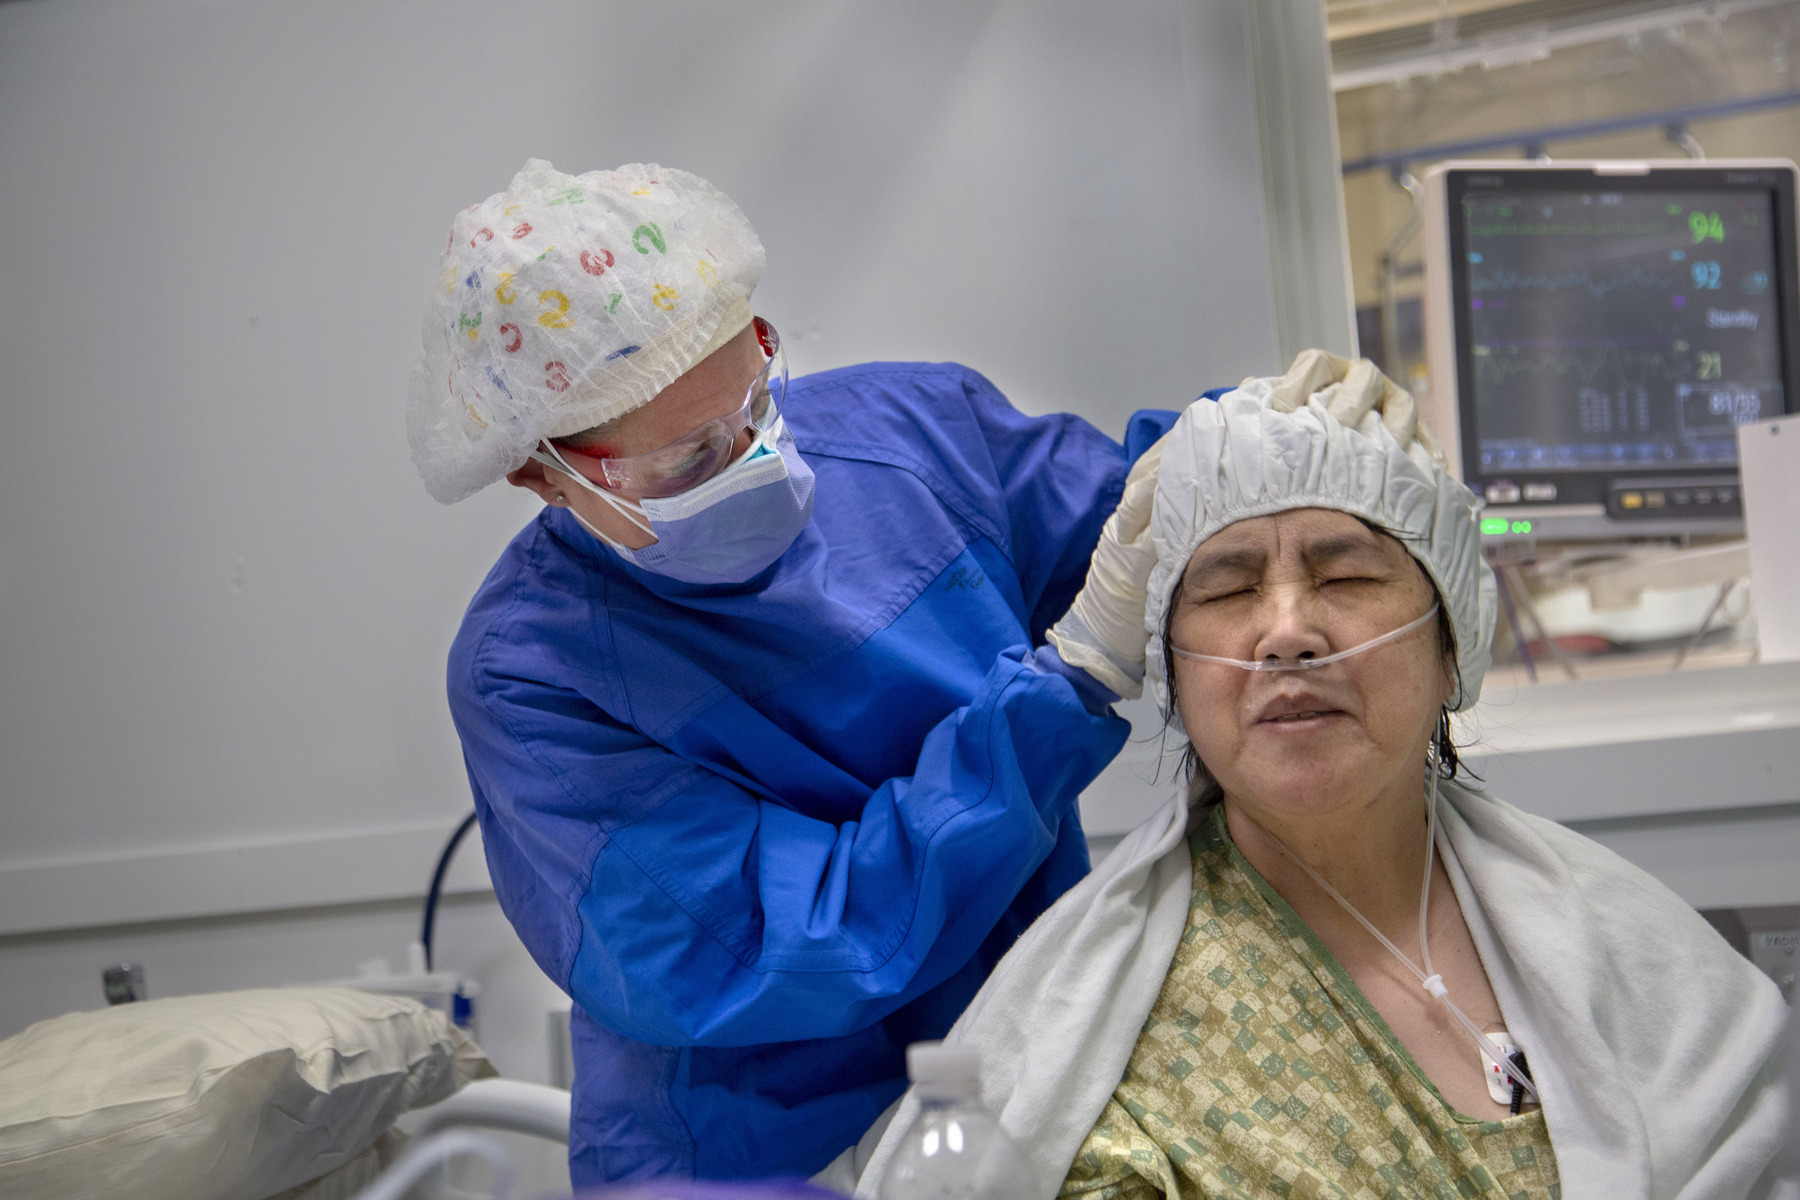 A patient gets her hair shampoo from RN Julie Falasca after being hospitalized for COVID-19 for 3 weeks at Holy Name Medical Center. 4/21/2020 Photo by Jeff Rhode